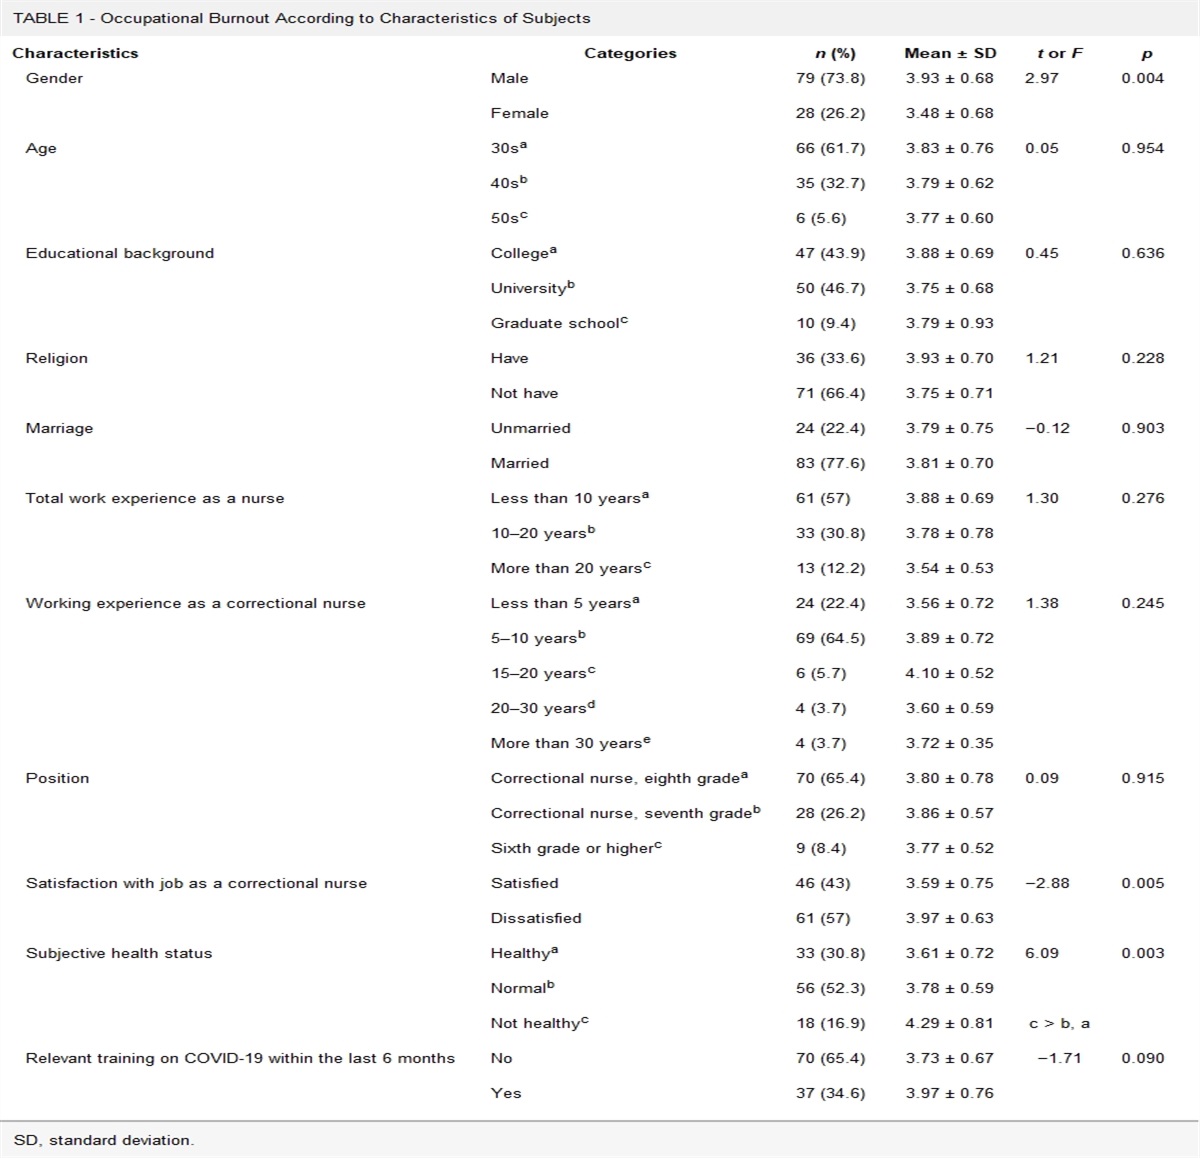 Effect of COVID-19 Risk Perception and COVID-19 Self-Care of Korean Correctional Nurses on Occupational Burnout: Mediating Effect of Stress and Anxiety About Viral Epidemics